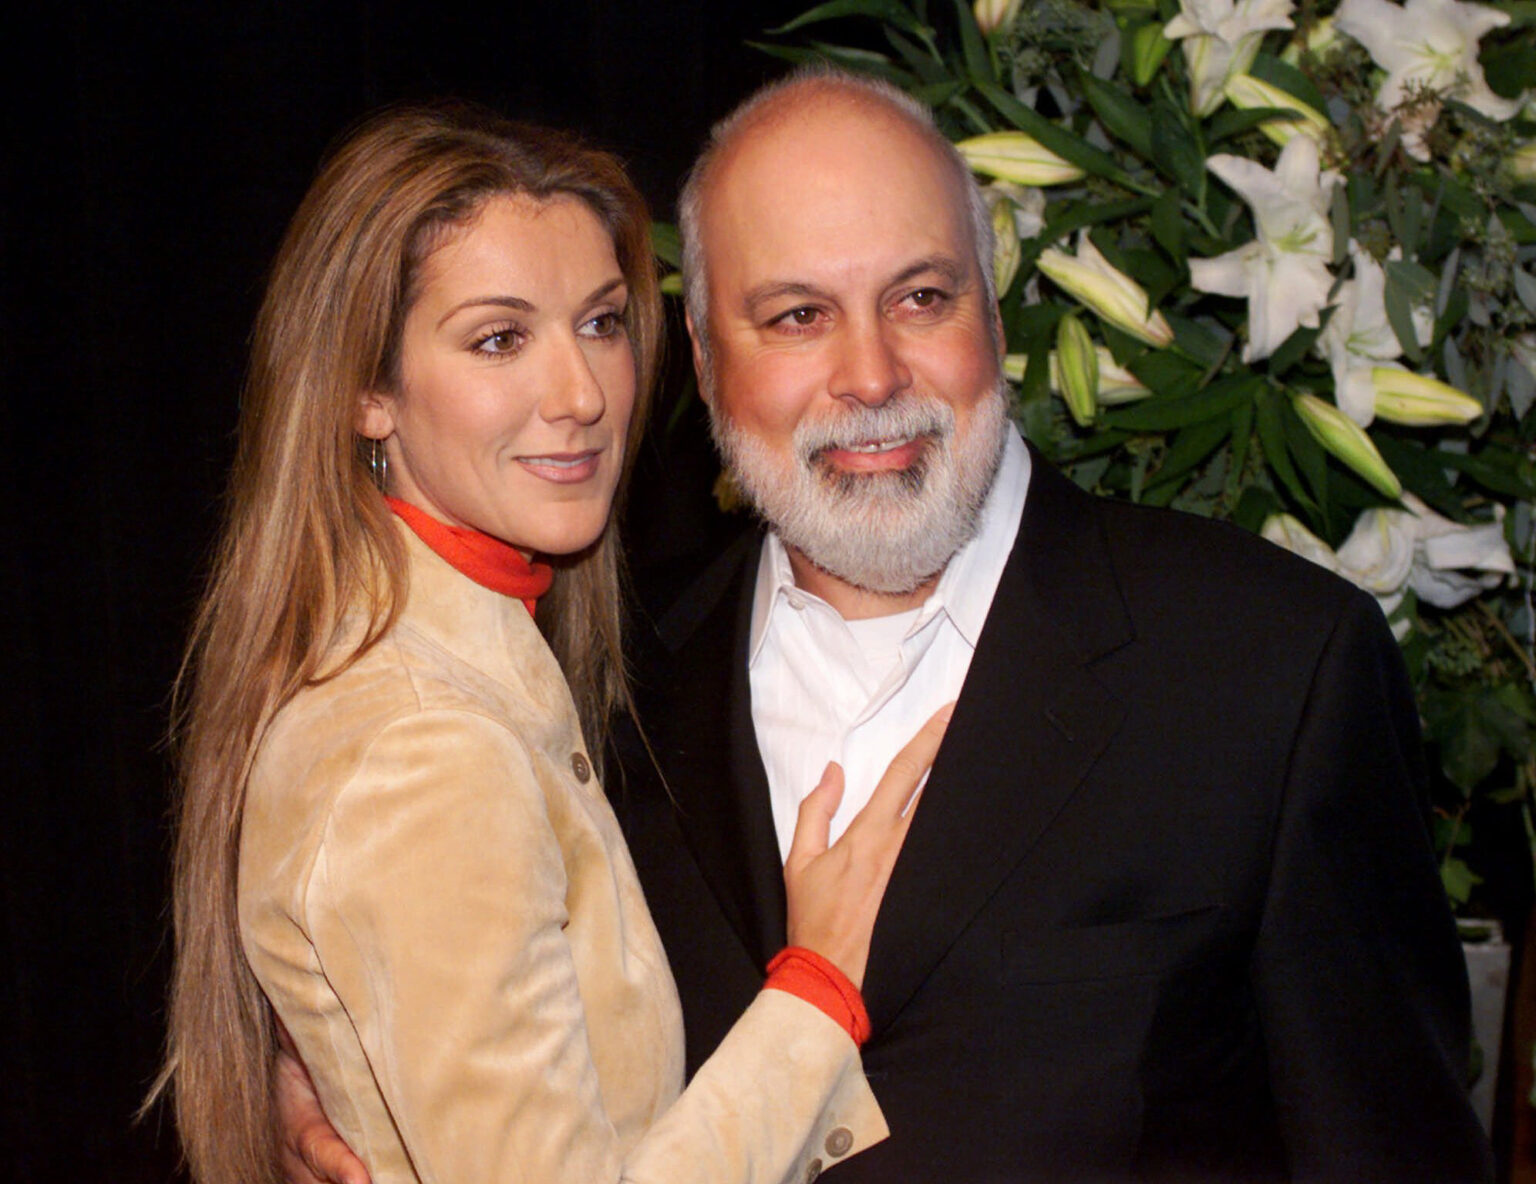 Celine Dion during the Year 1999 | CelineDionWeb.com